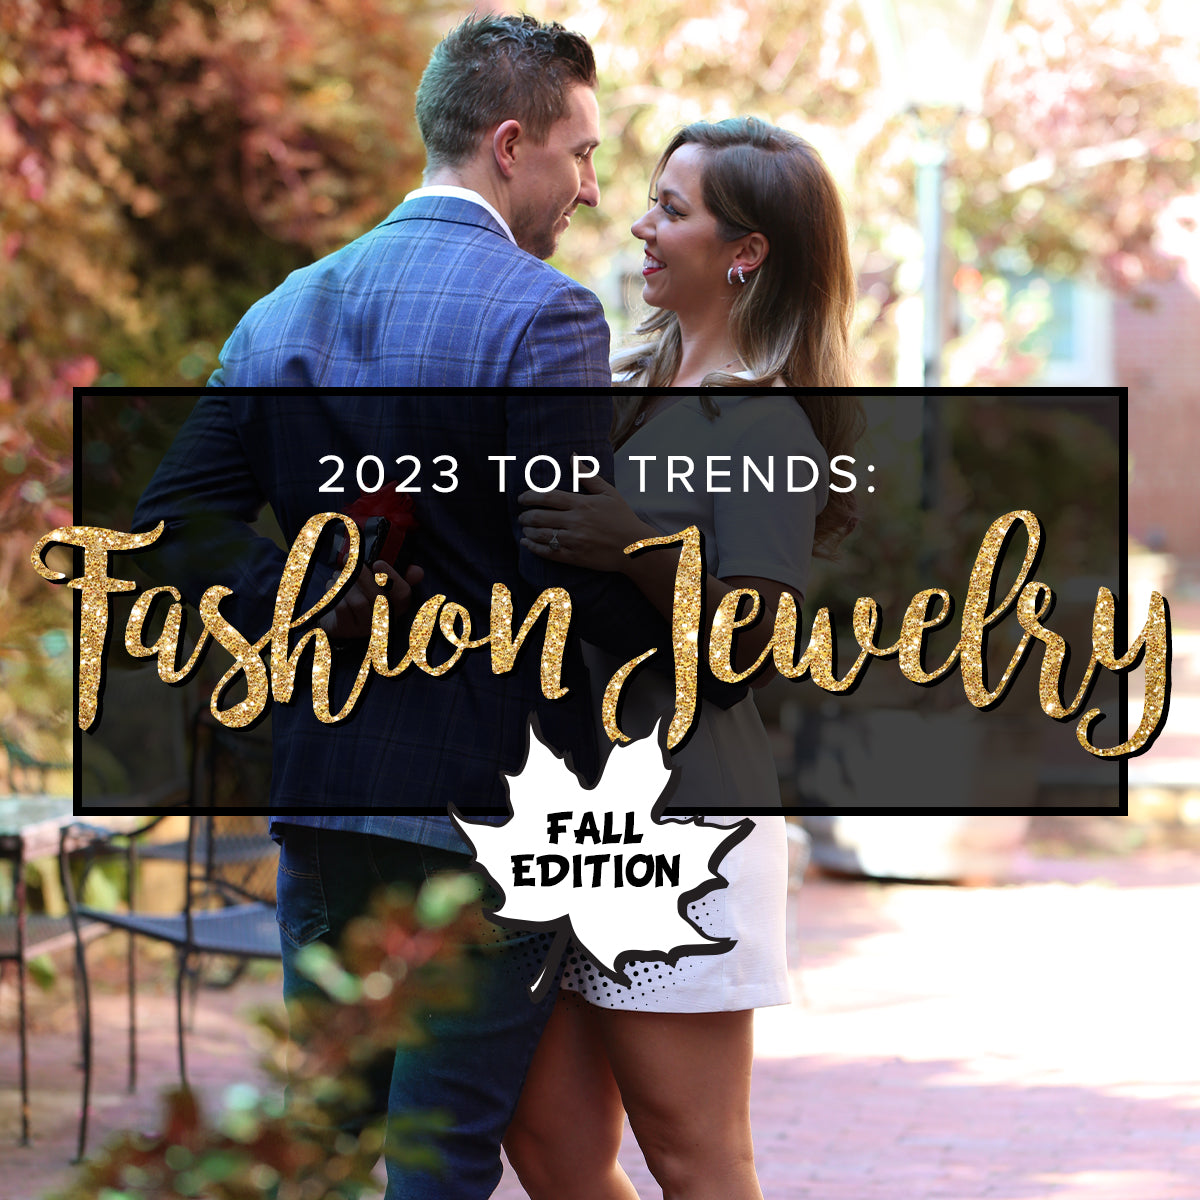 Top 10 Fall Jewelry Trends for 2023